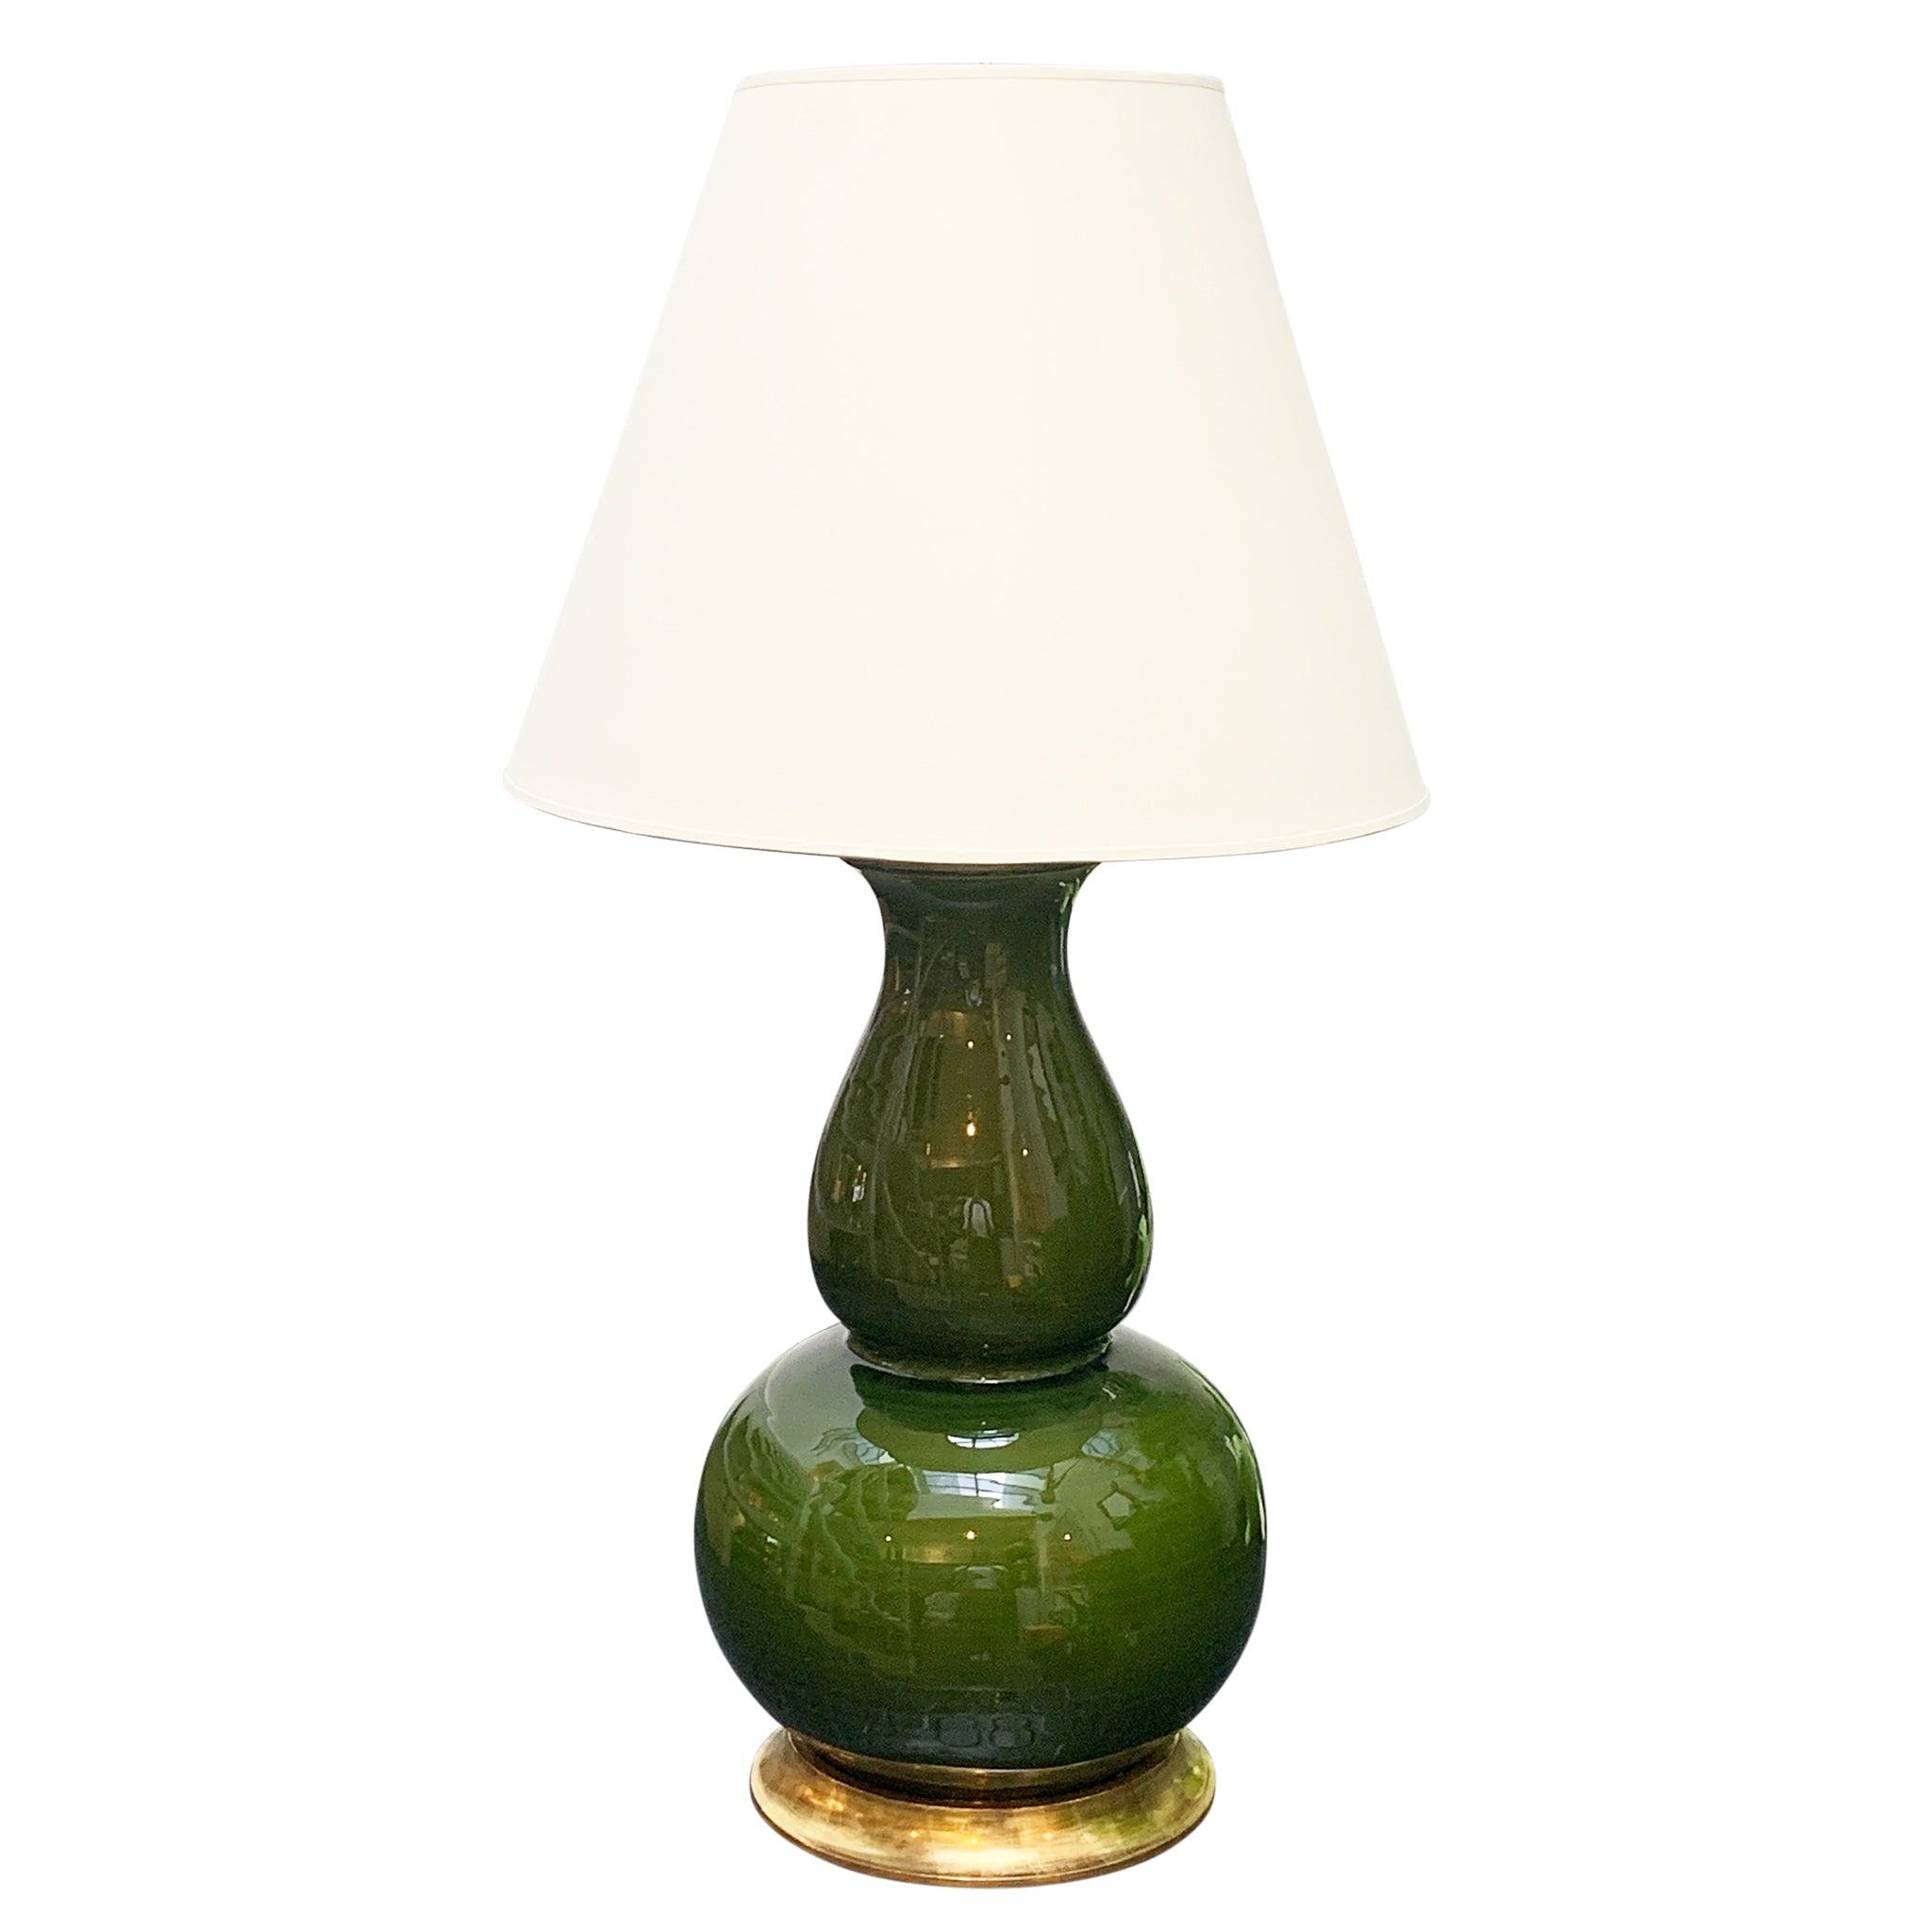 Hand-Thrown Double Gourd Lamp in Spruce